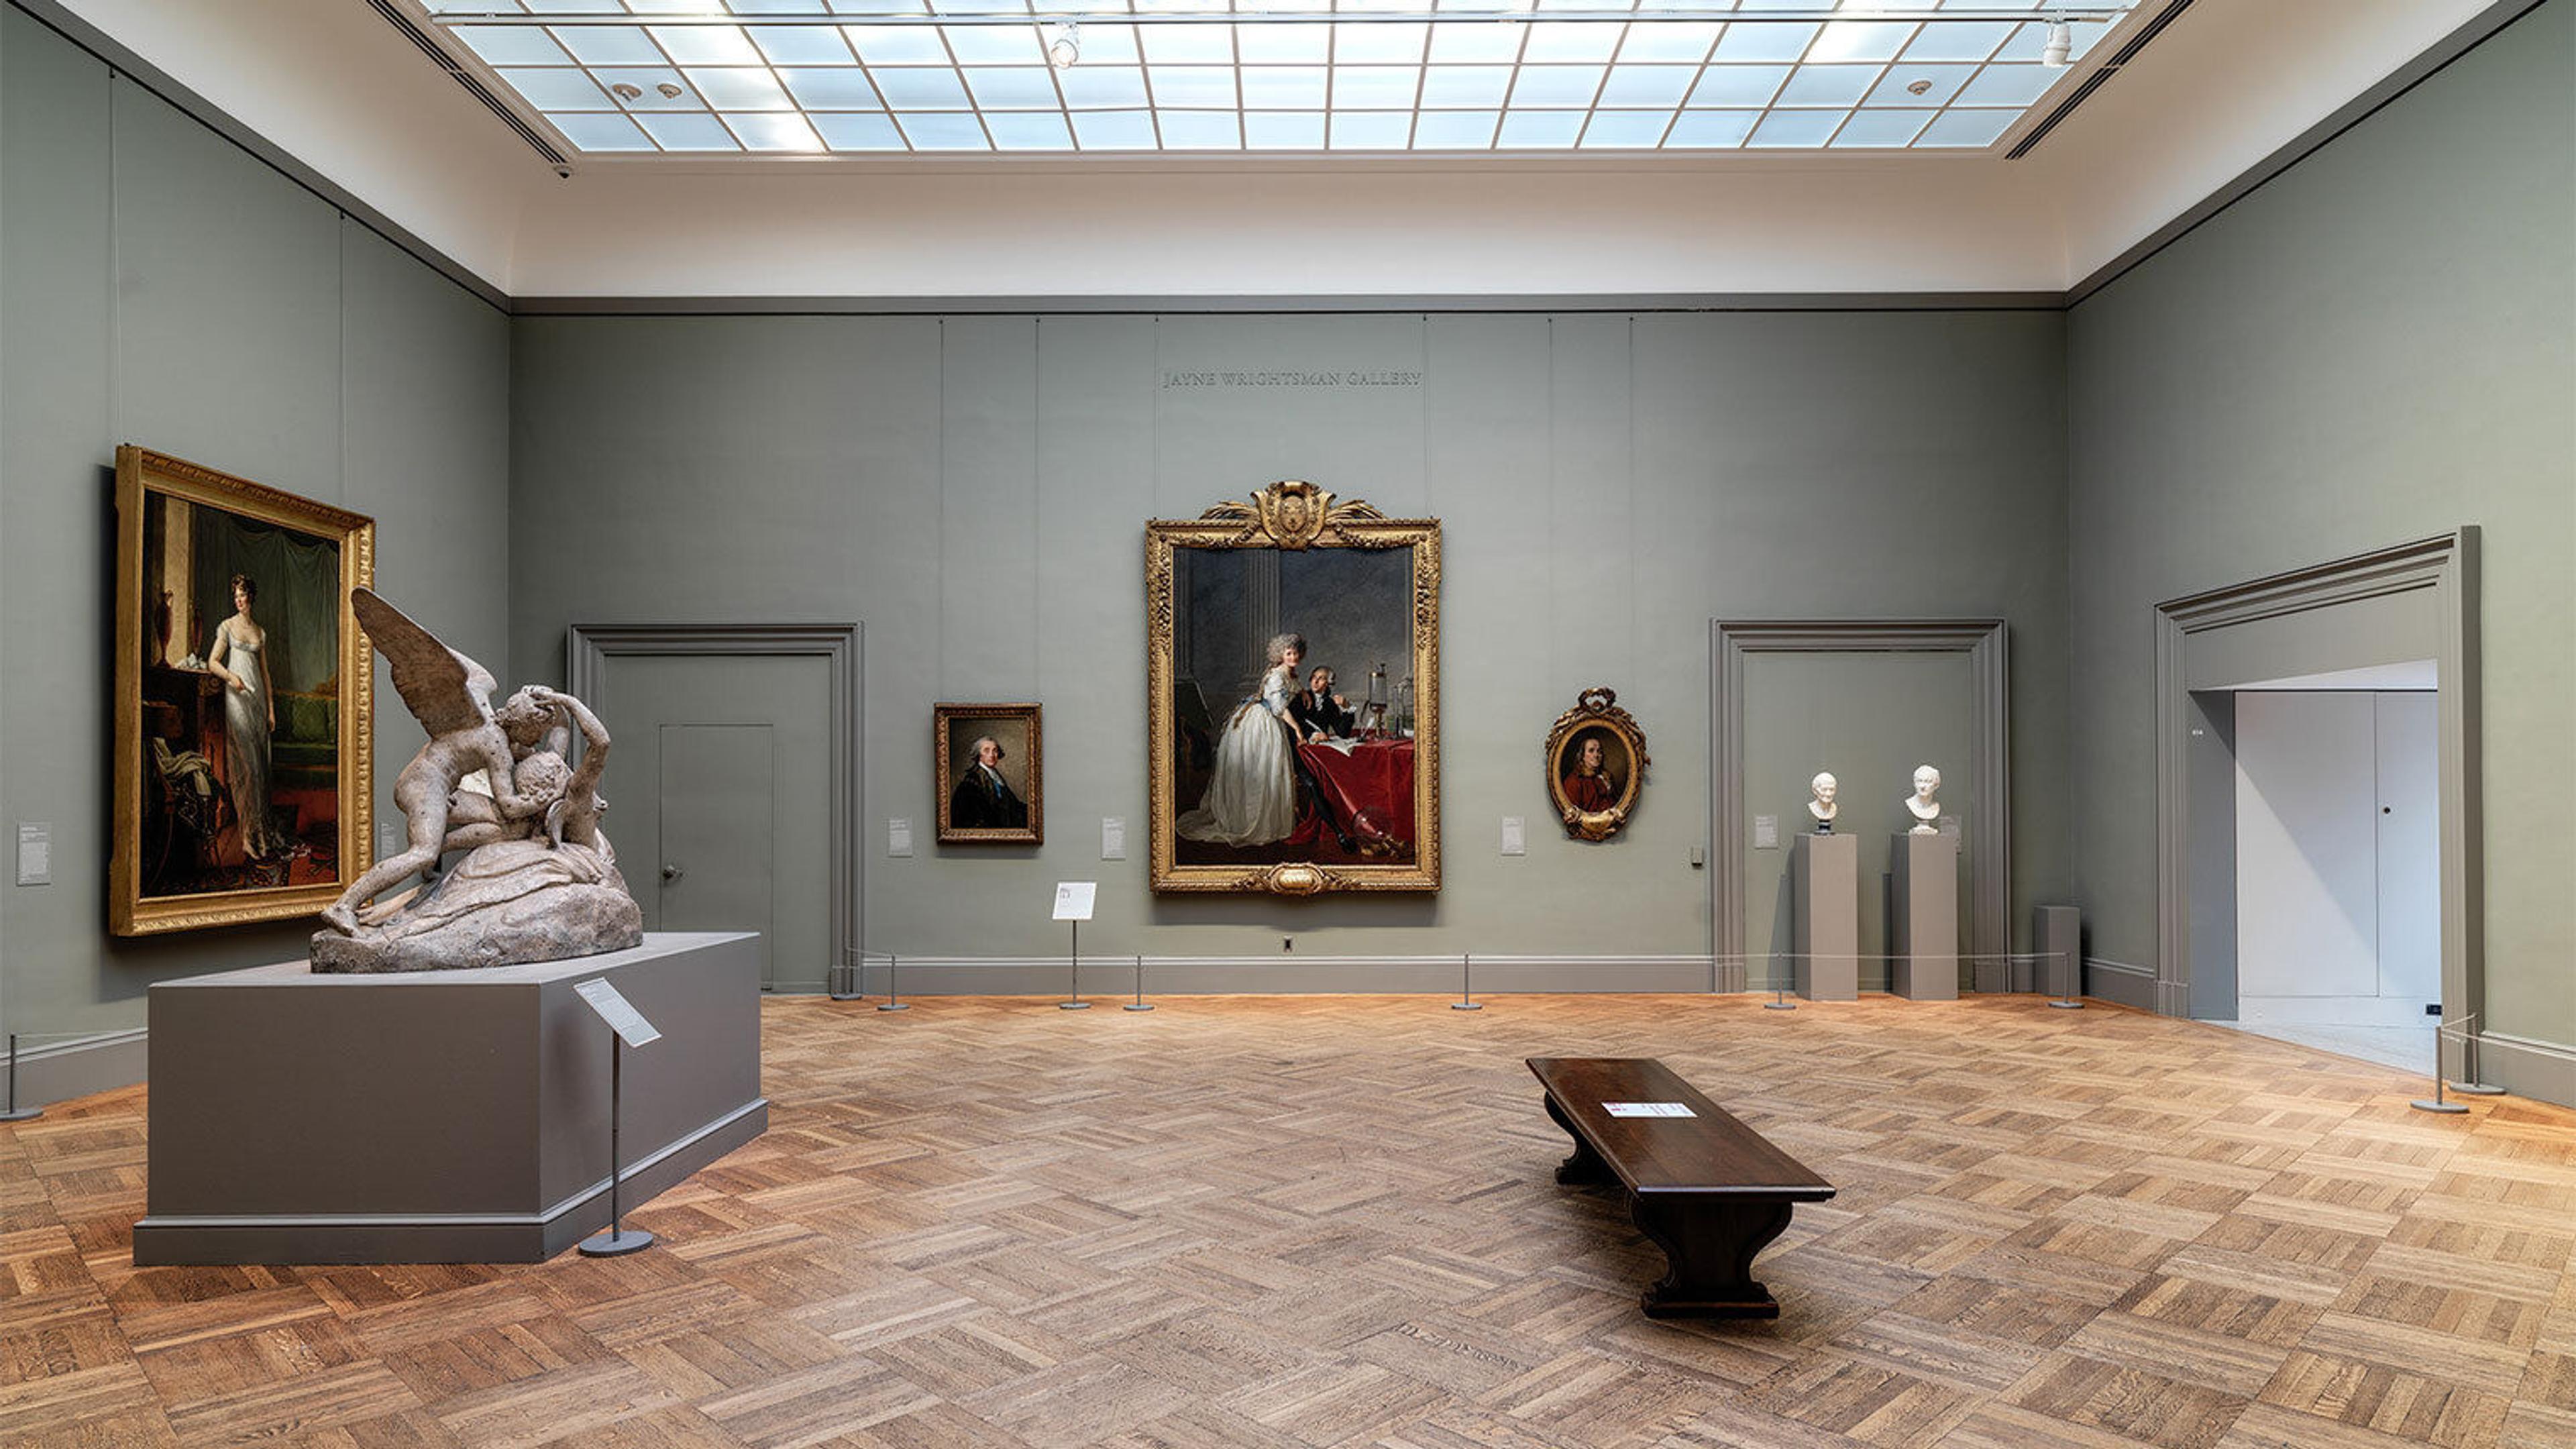 The newly reinstalled galleries include sculpture among the paintings